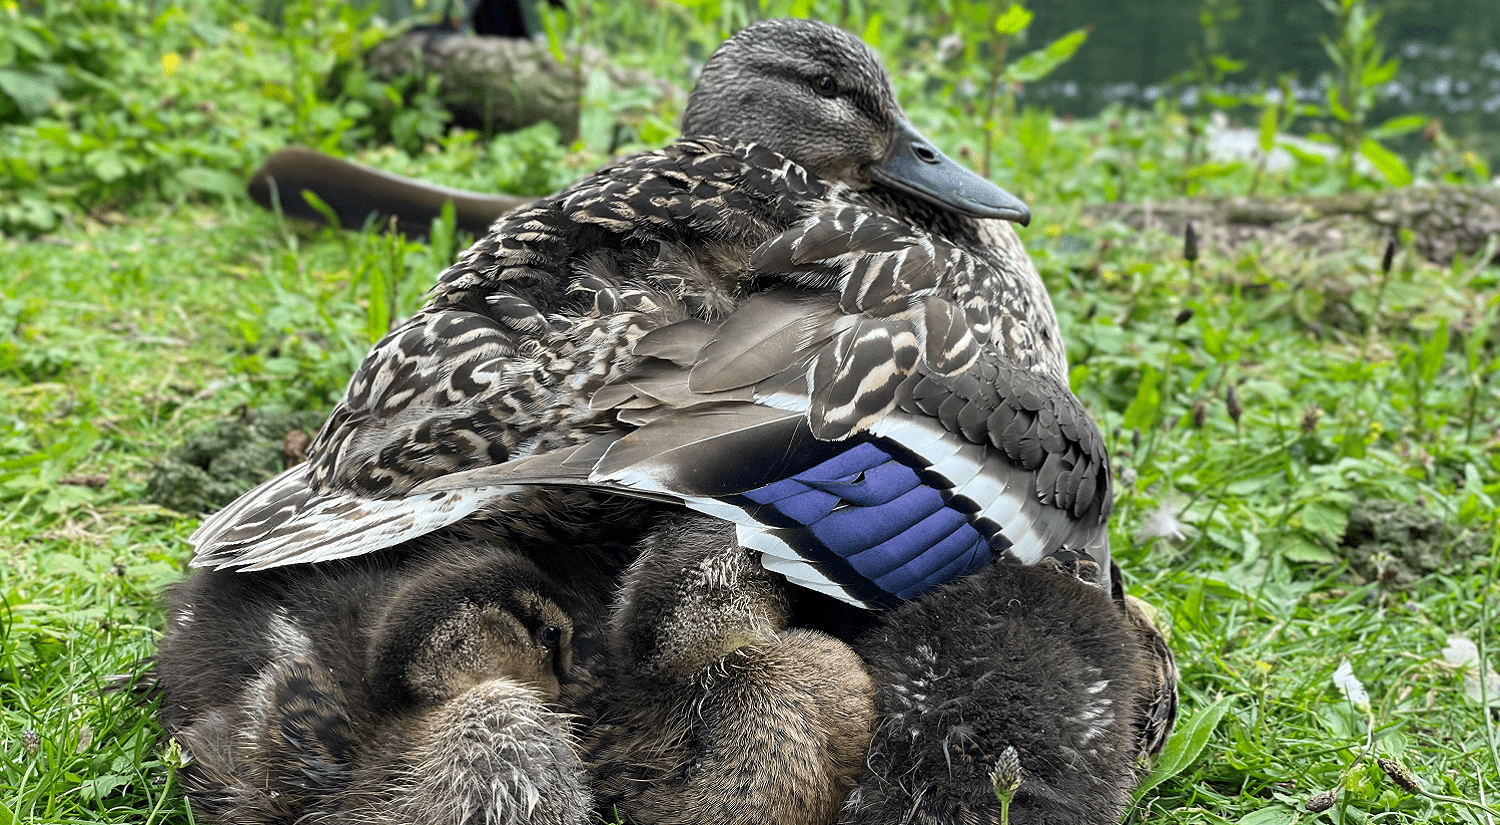 An adult duck nesting with baby ducks in the grass